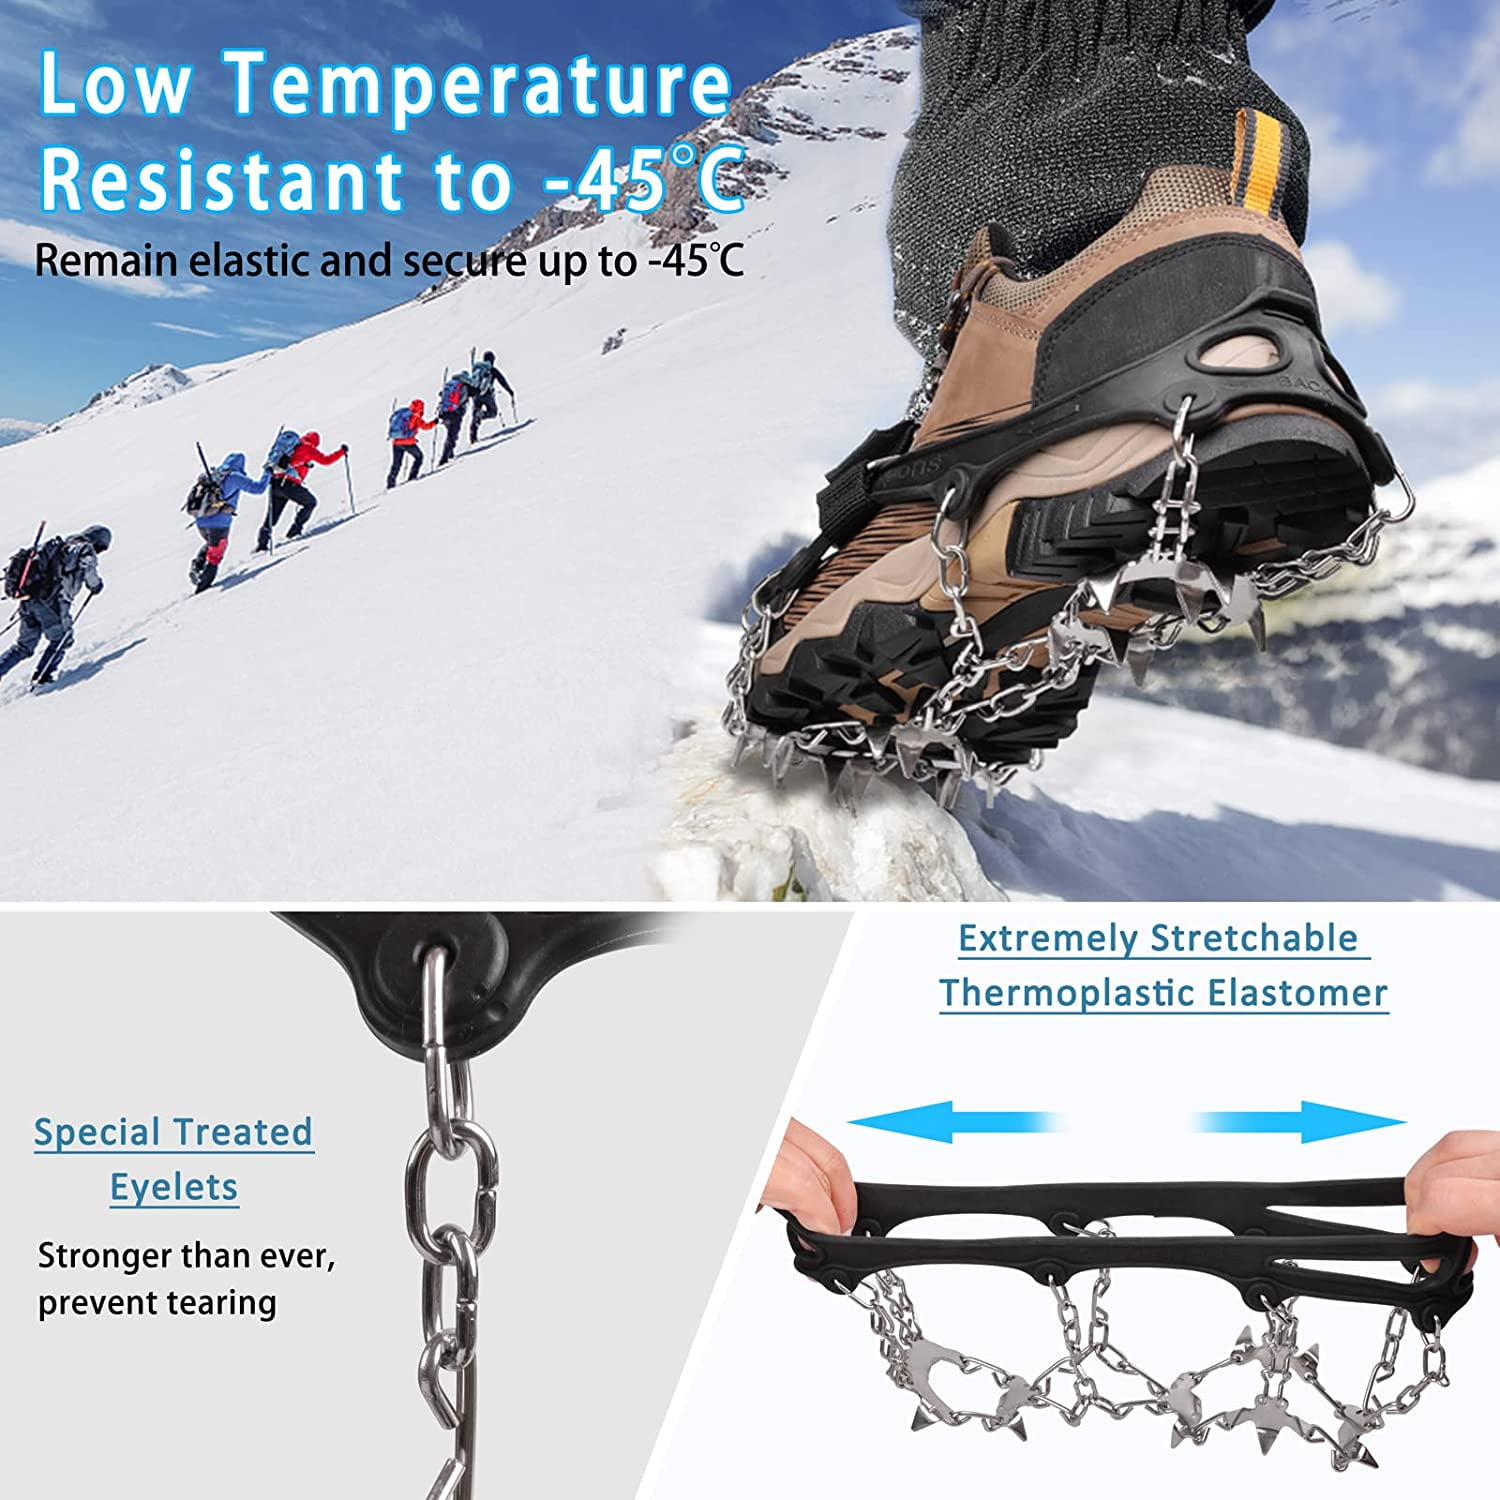 OROOTL Crampons Ice Cleats Walk Traction Snow Cleats for Boots